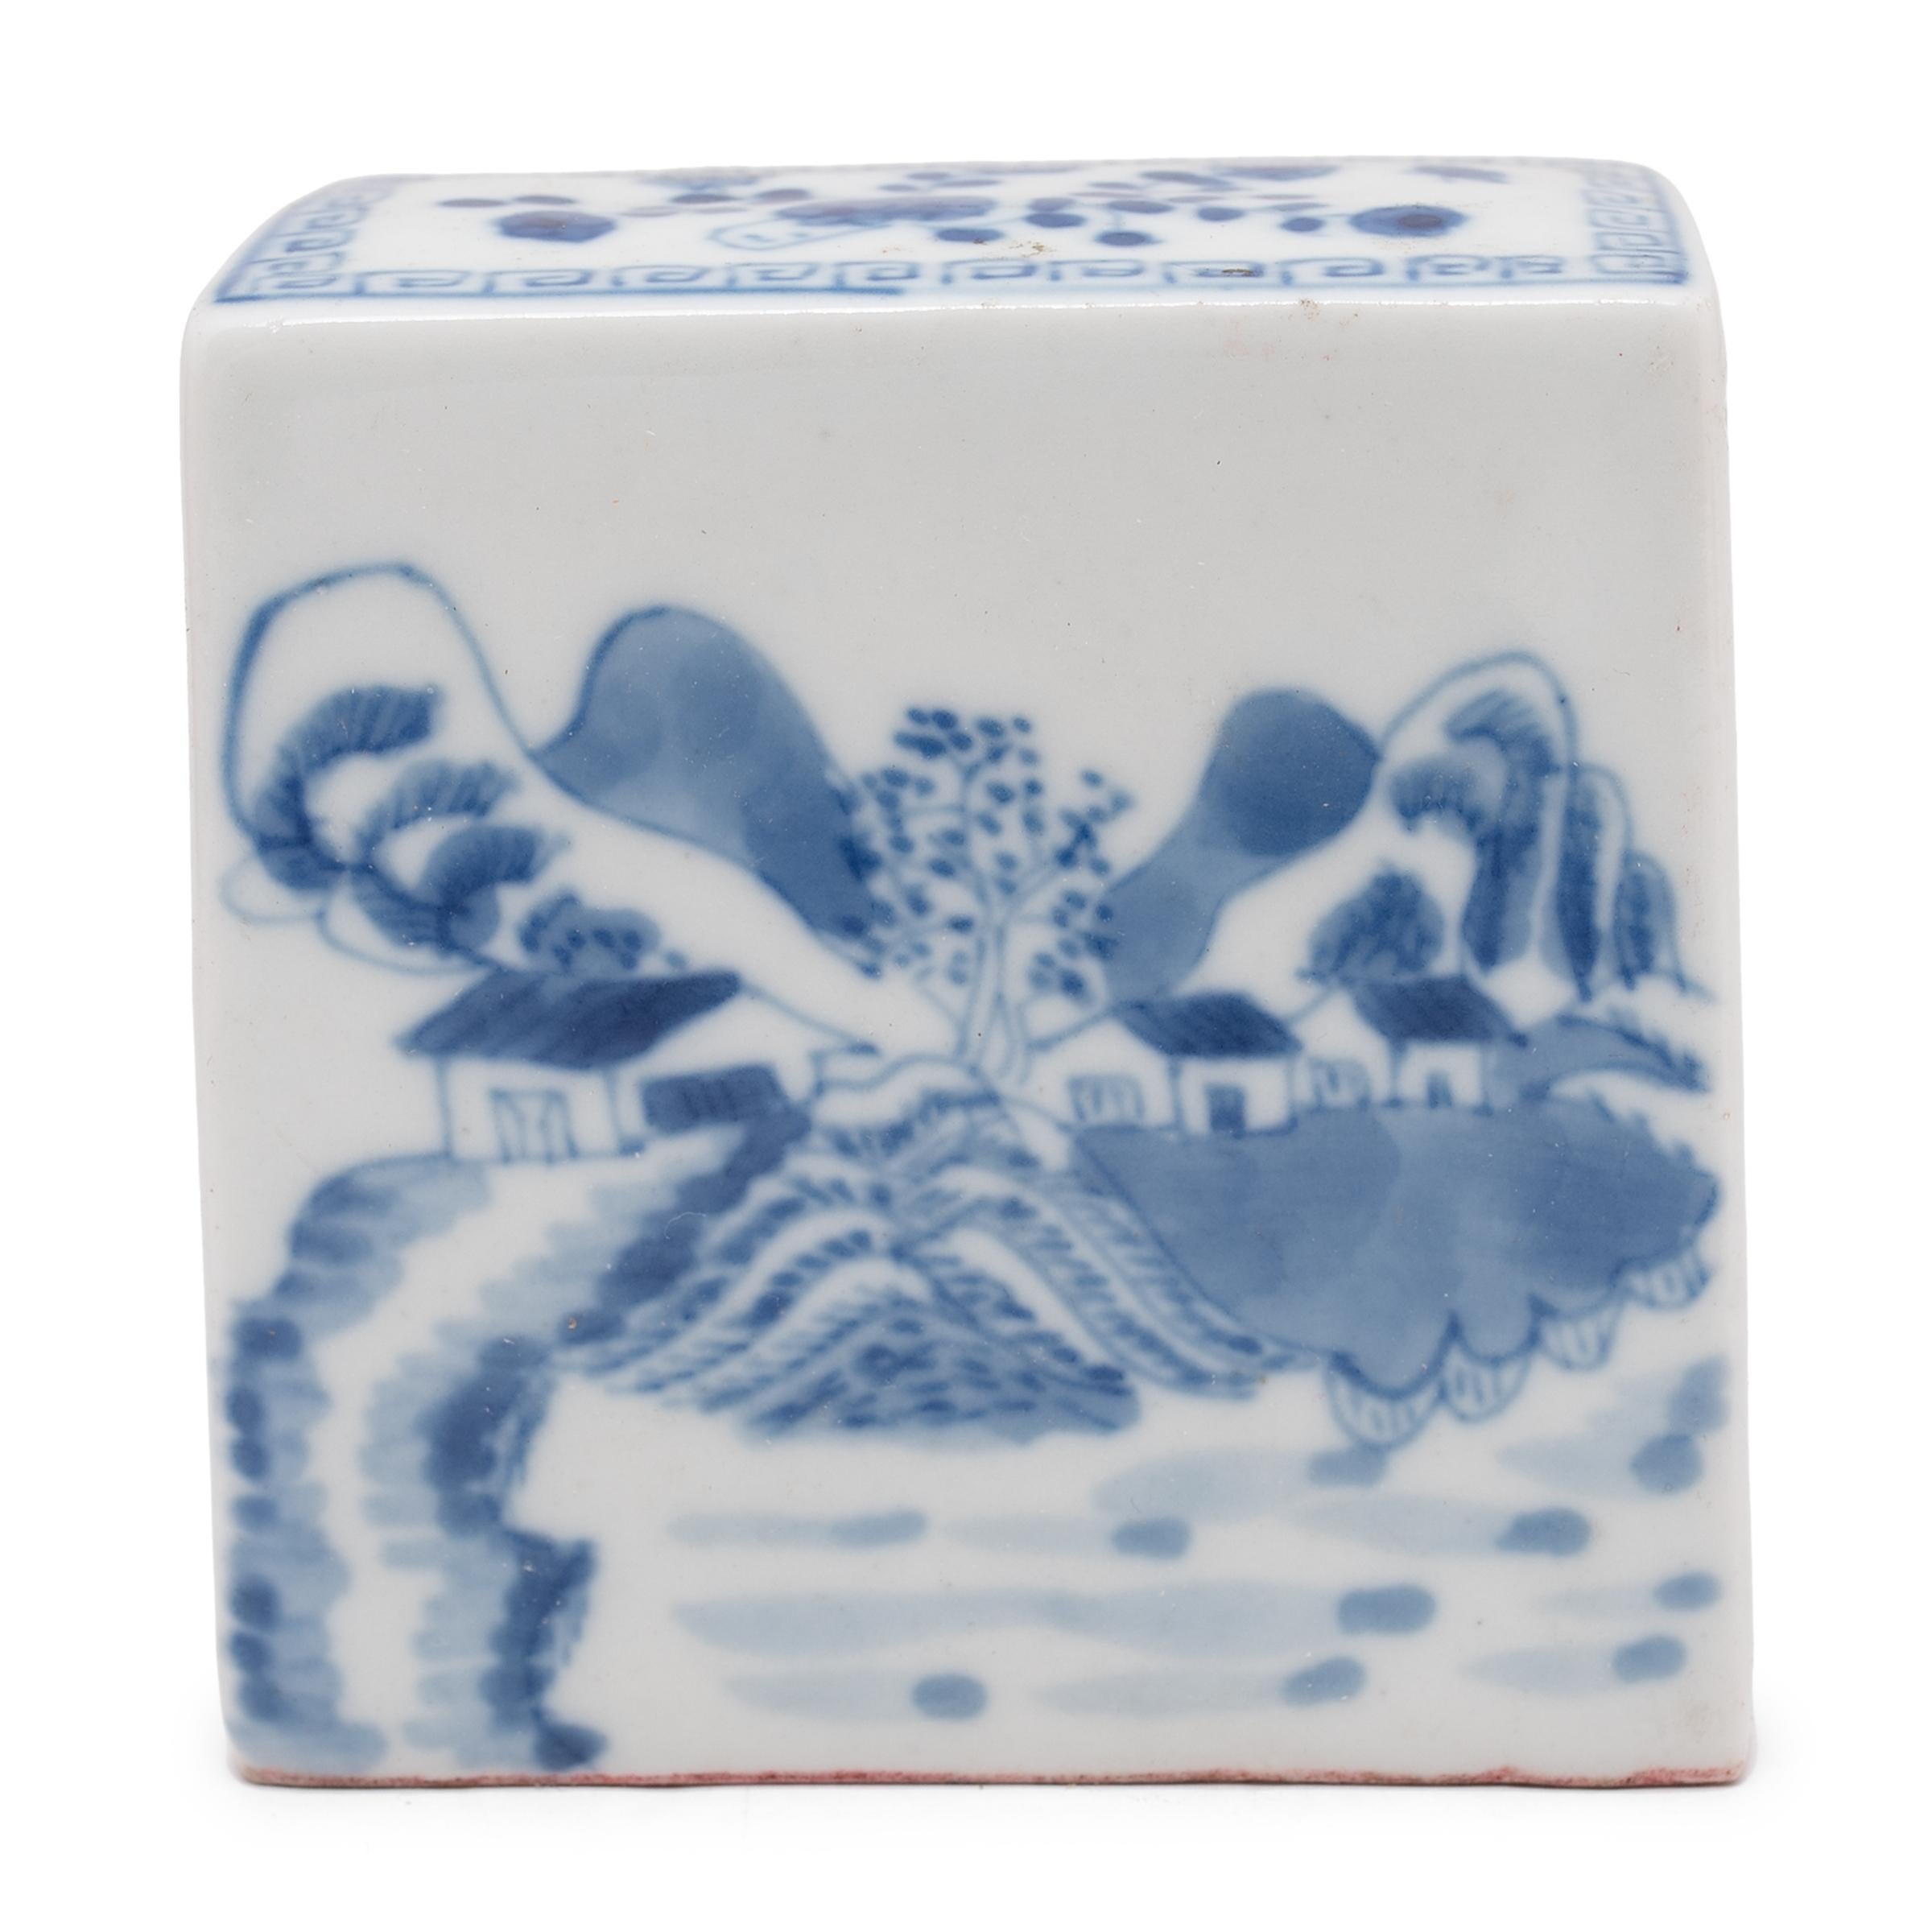 This small porcelain block recreates the personalized seals used to sign important documents throughout the Ming and Qing dynasties. Also known as a chop, such stamps were widely used by anyone who regularly signed formal documents, such as